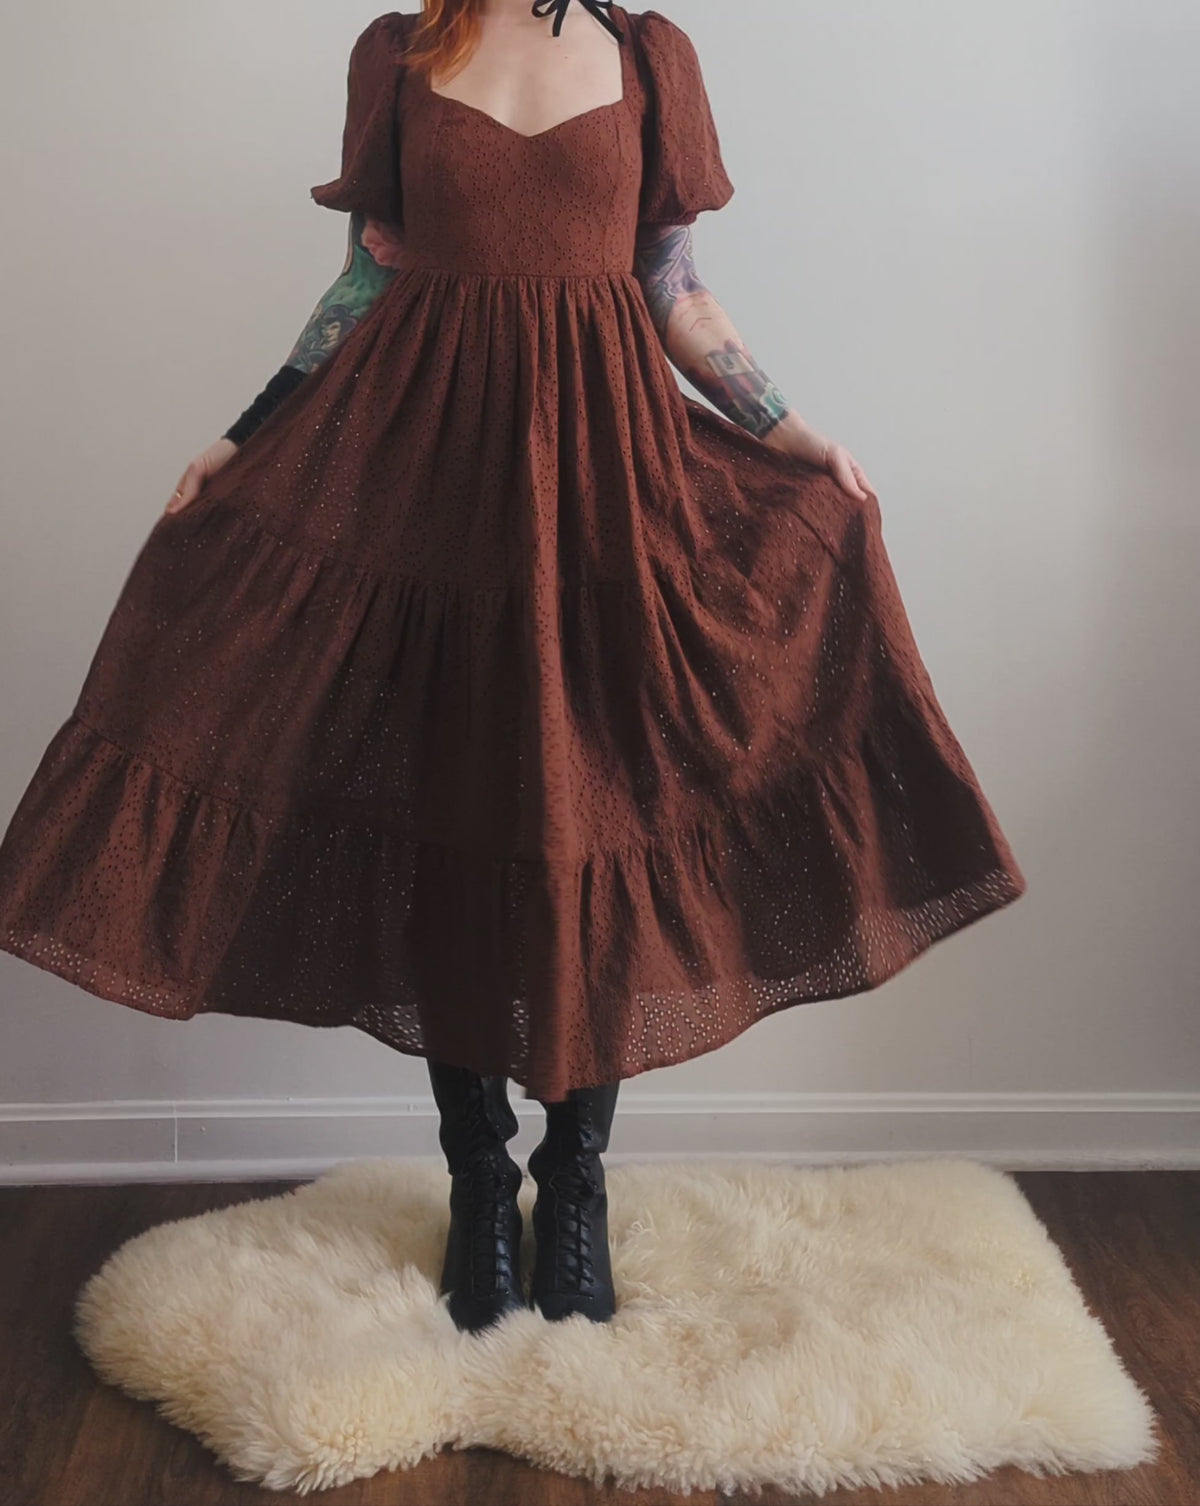 70s inspired prairie dress made of 100% eyelet cotton in a walnut brown colorway. Features puff sleeves, sweetheart neckline, smocked back with tie closure, and ruffled tiered skirt. 